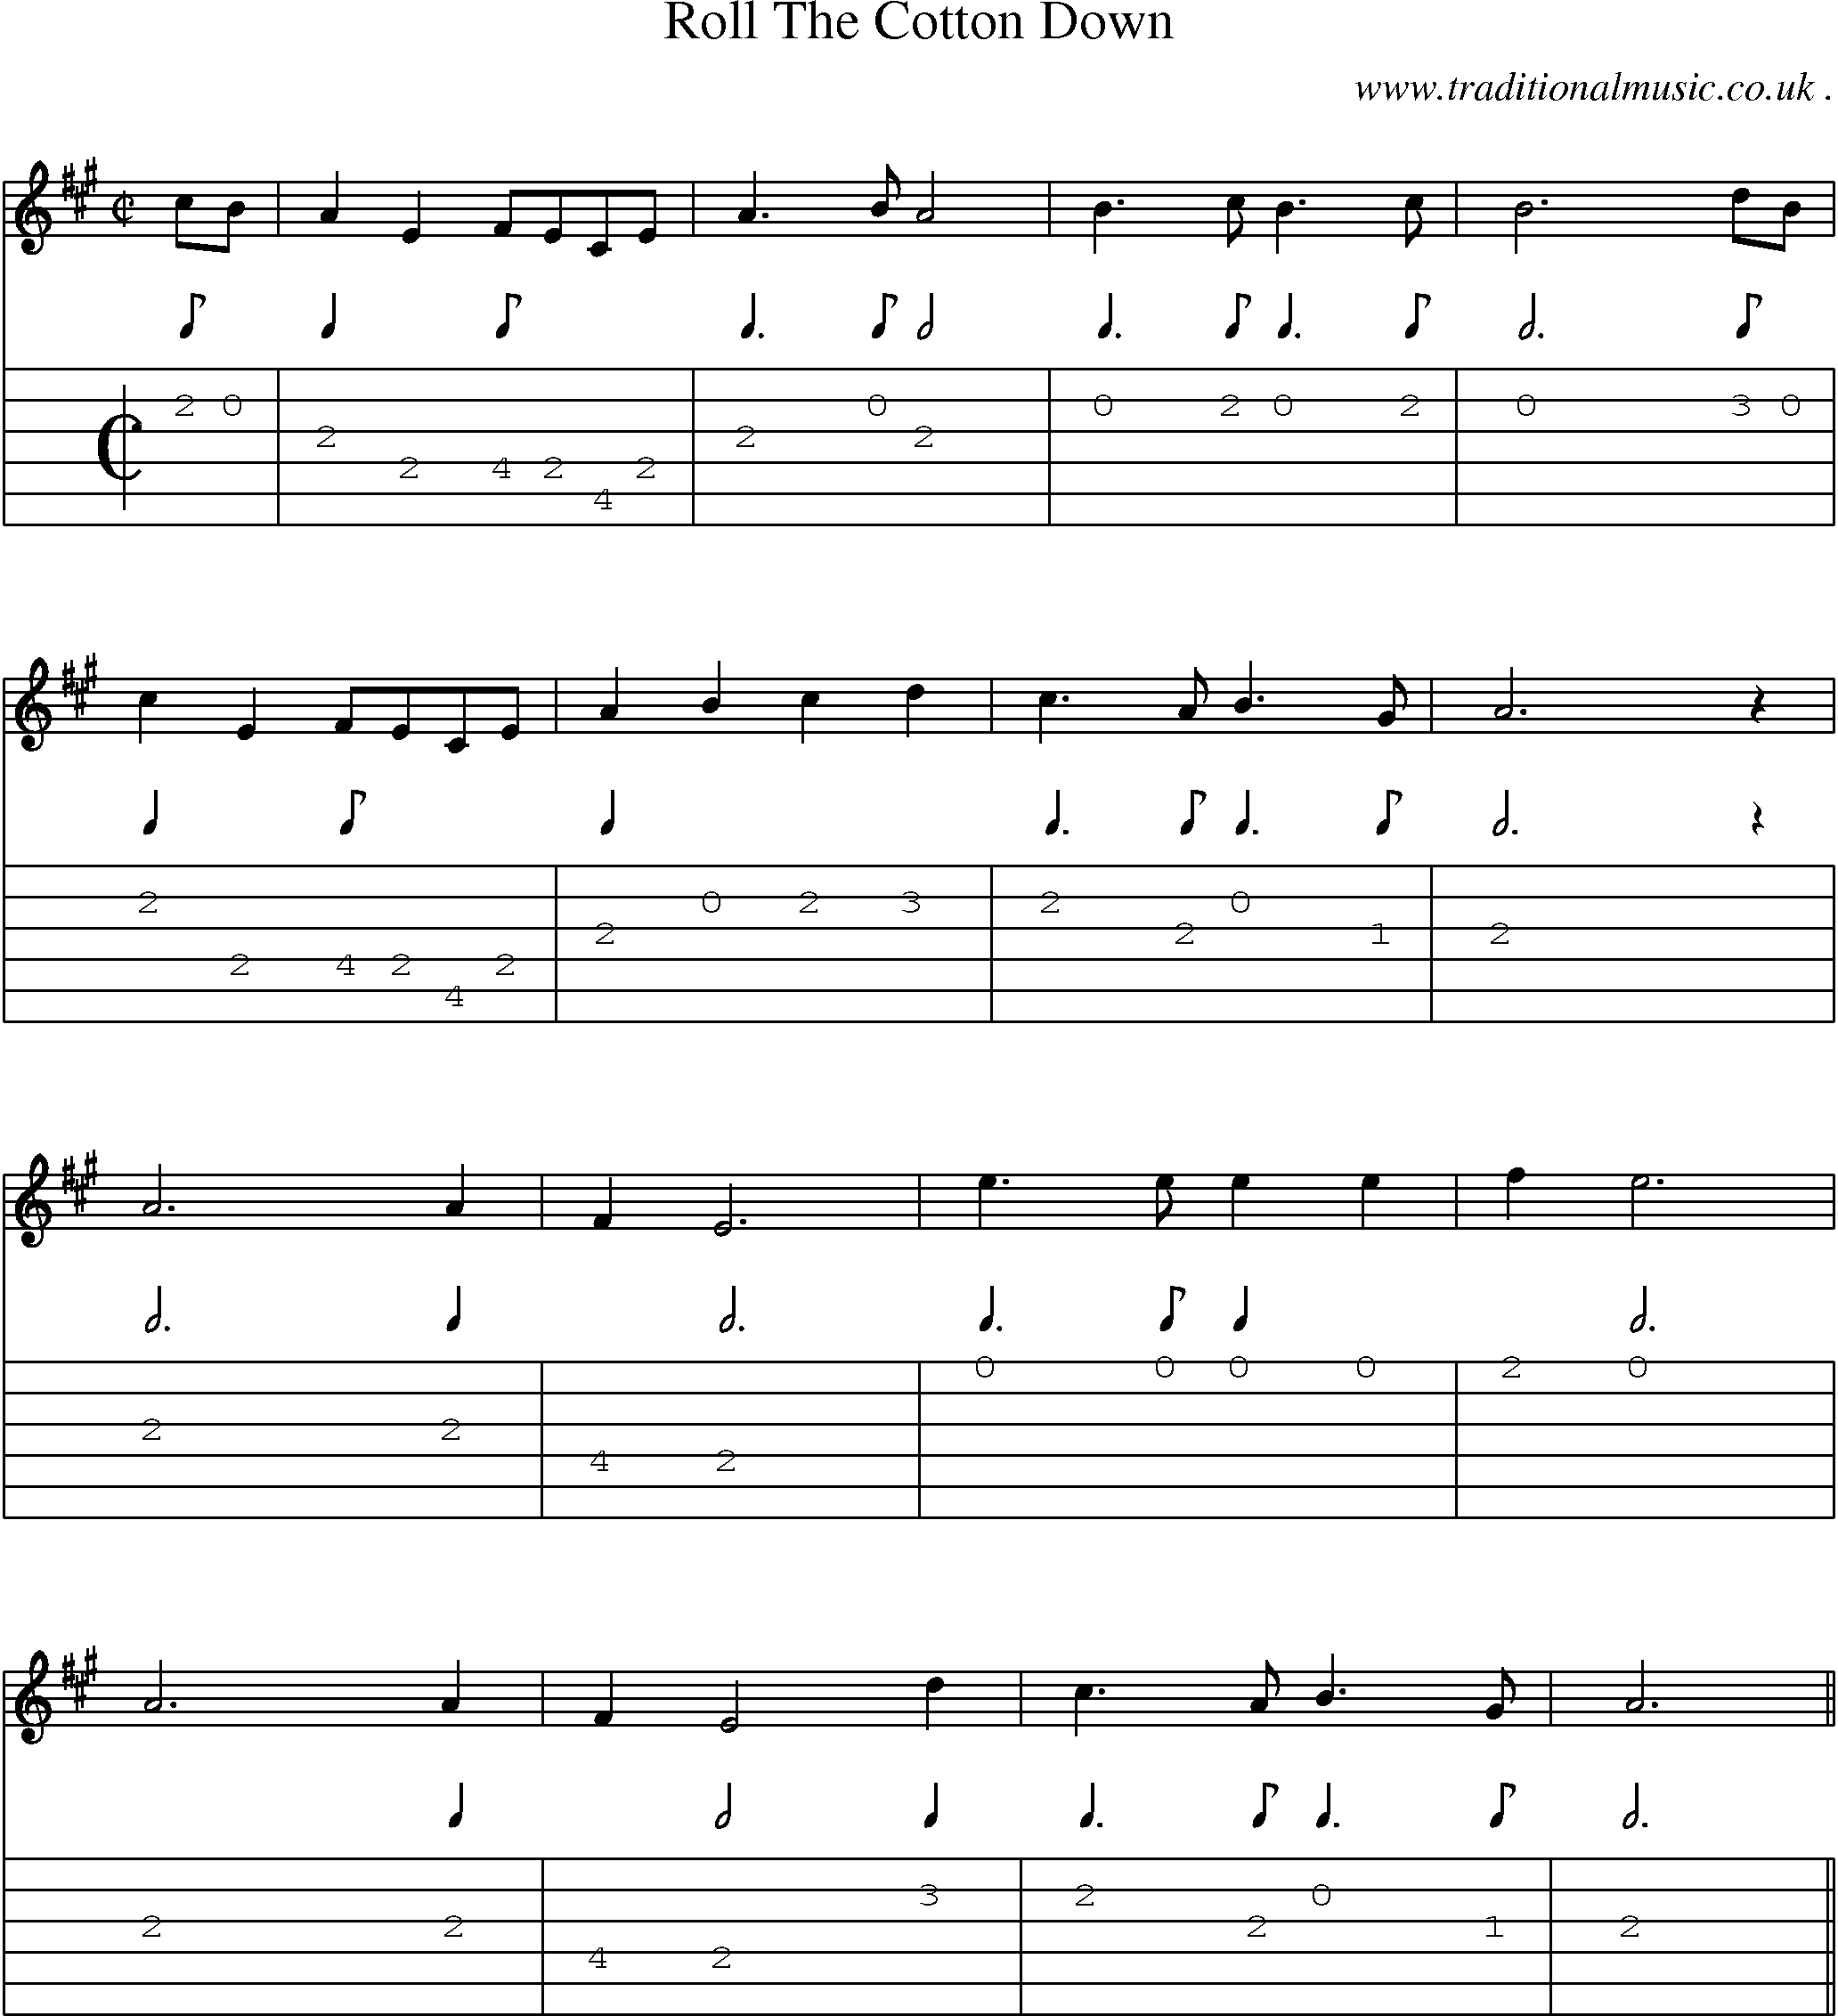 Sheet-Music and Guitar Tabs for Roll The Cotton Down